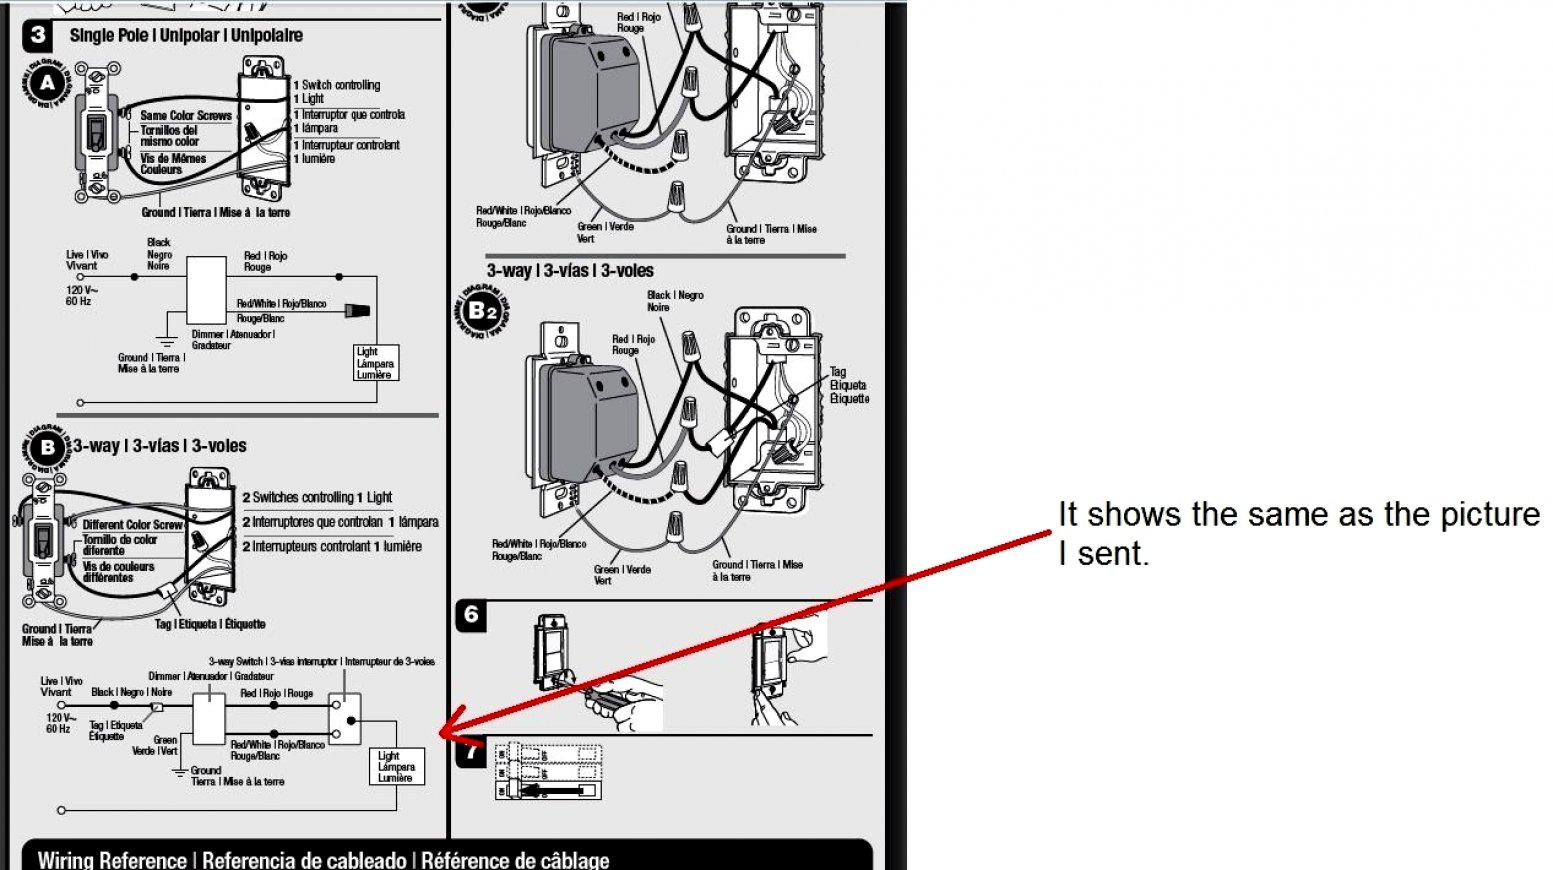 S2L Lutron Dimmer Switch Wiring Diagram | Manual E-Books - Lutron 3 Way Dimmer Switch Wiring Diagram